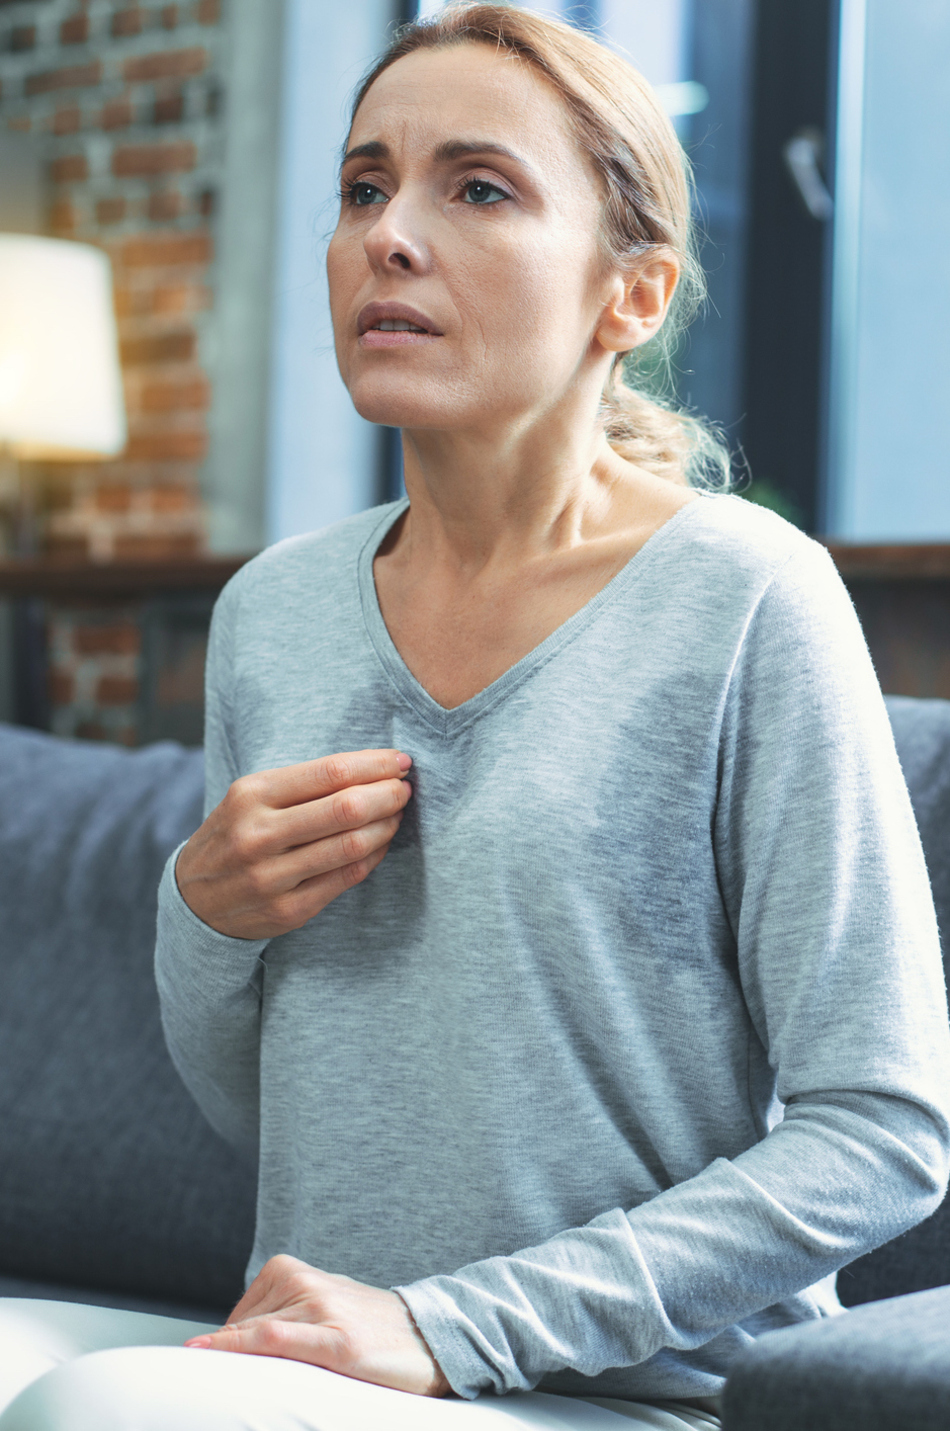 Why Do Women Have Hot Flashes?